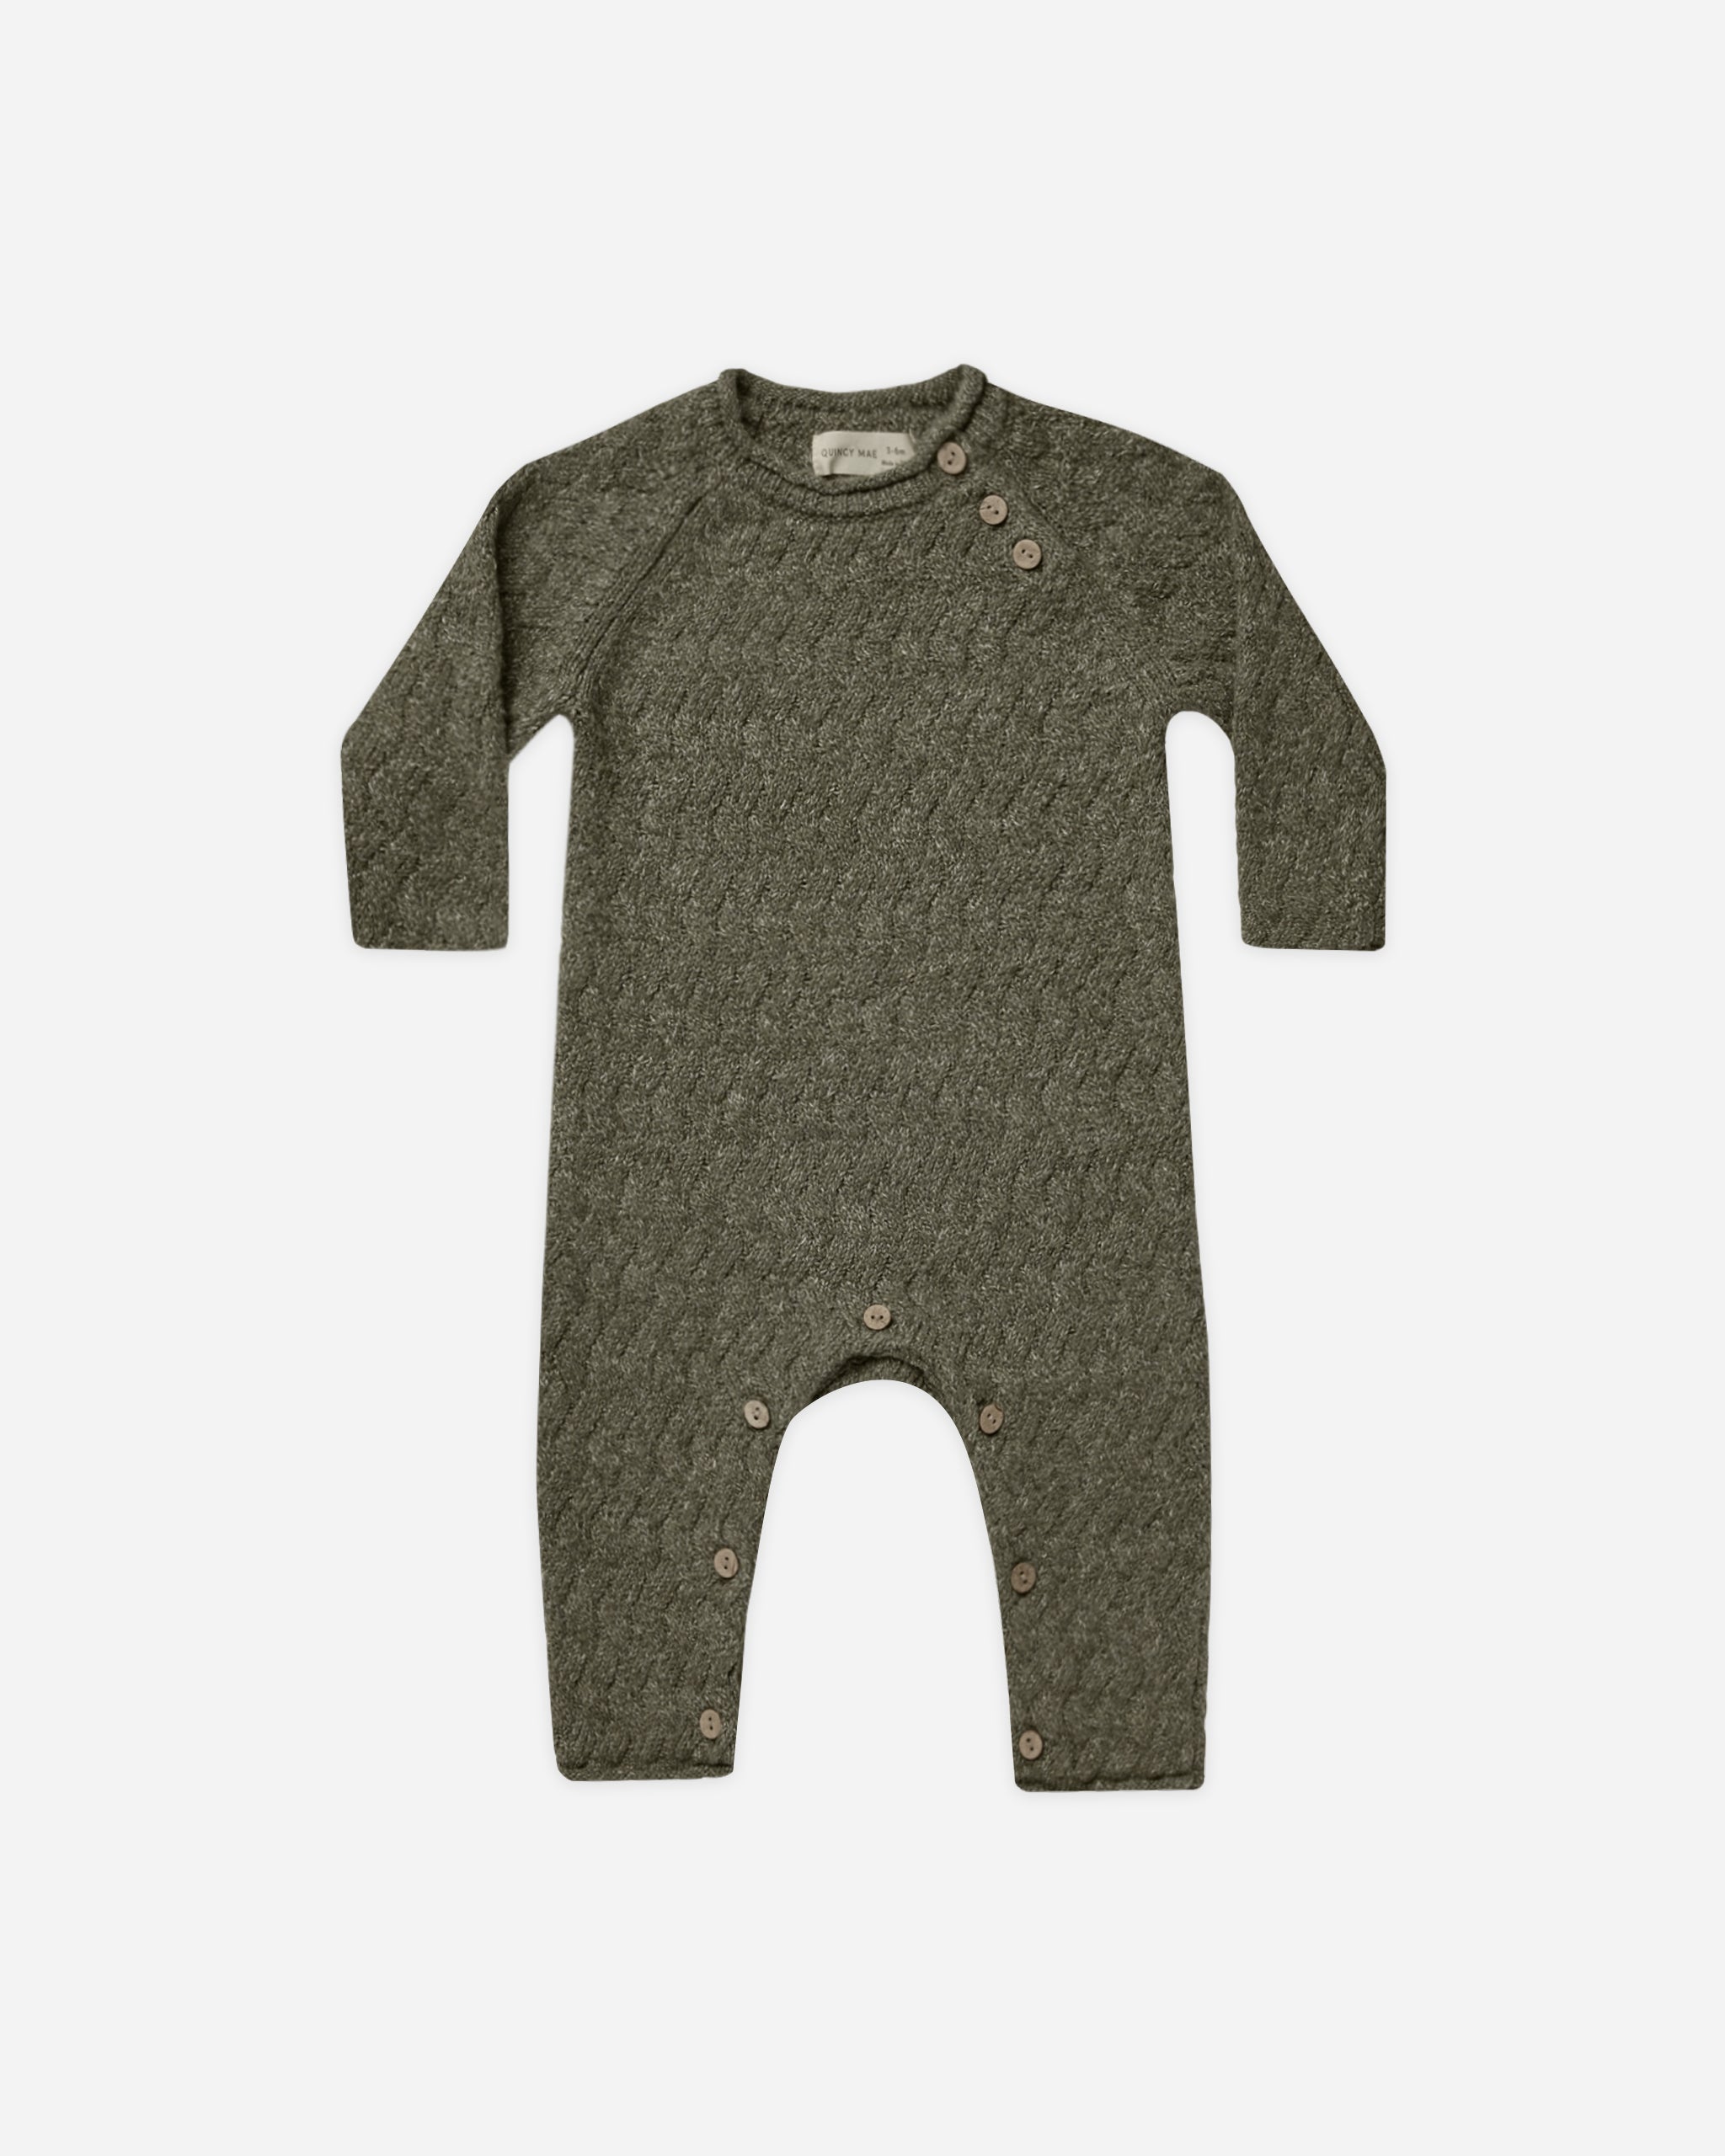 Knit Jumpsuit || Forest - Rylee + Cru | Kids Clothes | Trendy Baby Clothes | Modern Infant Outfits |